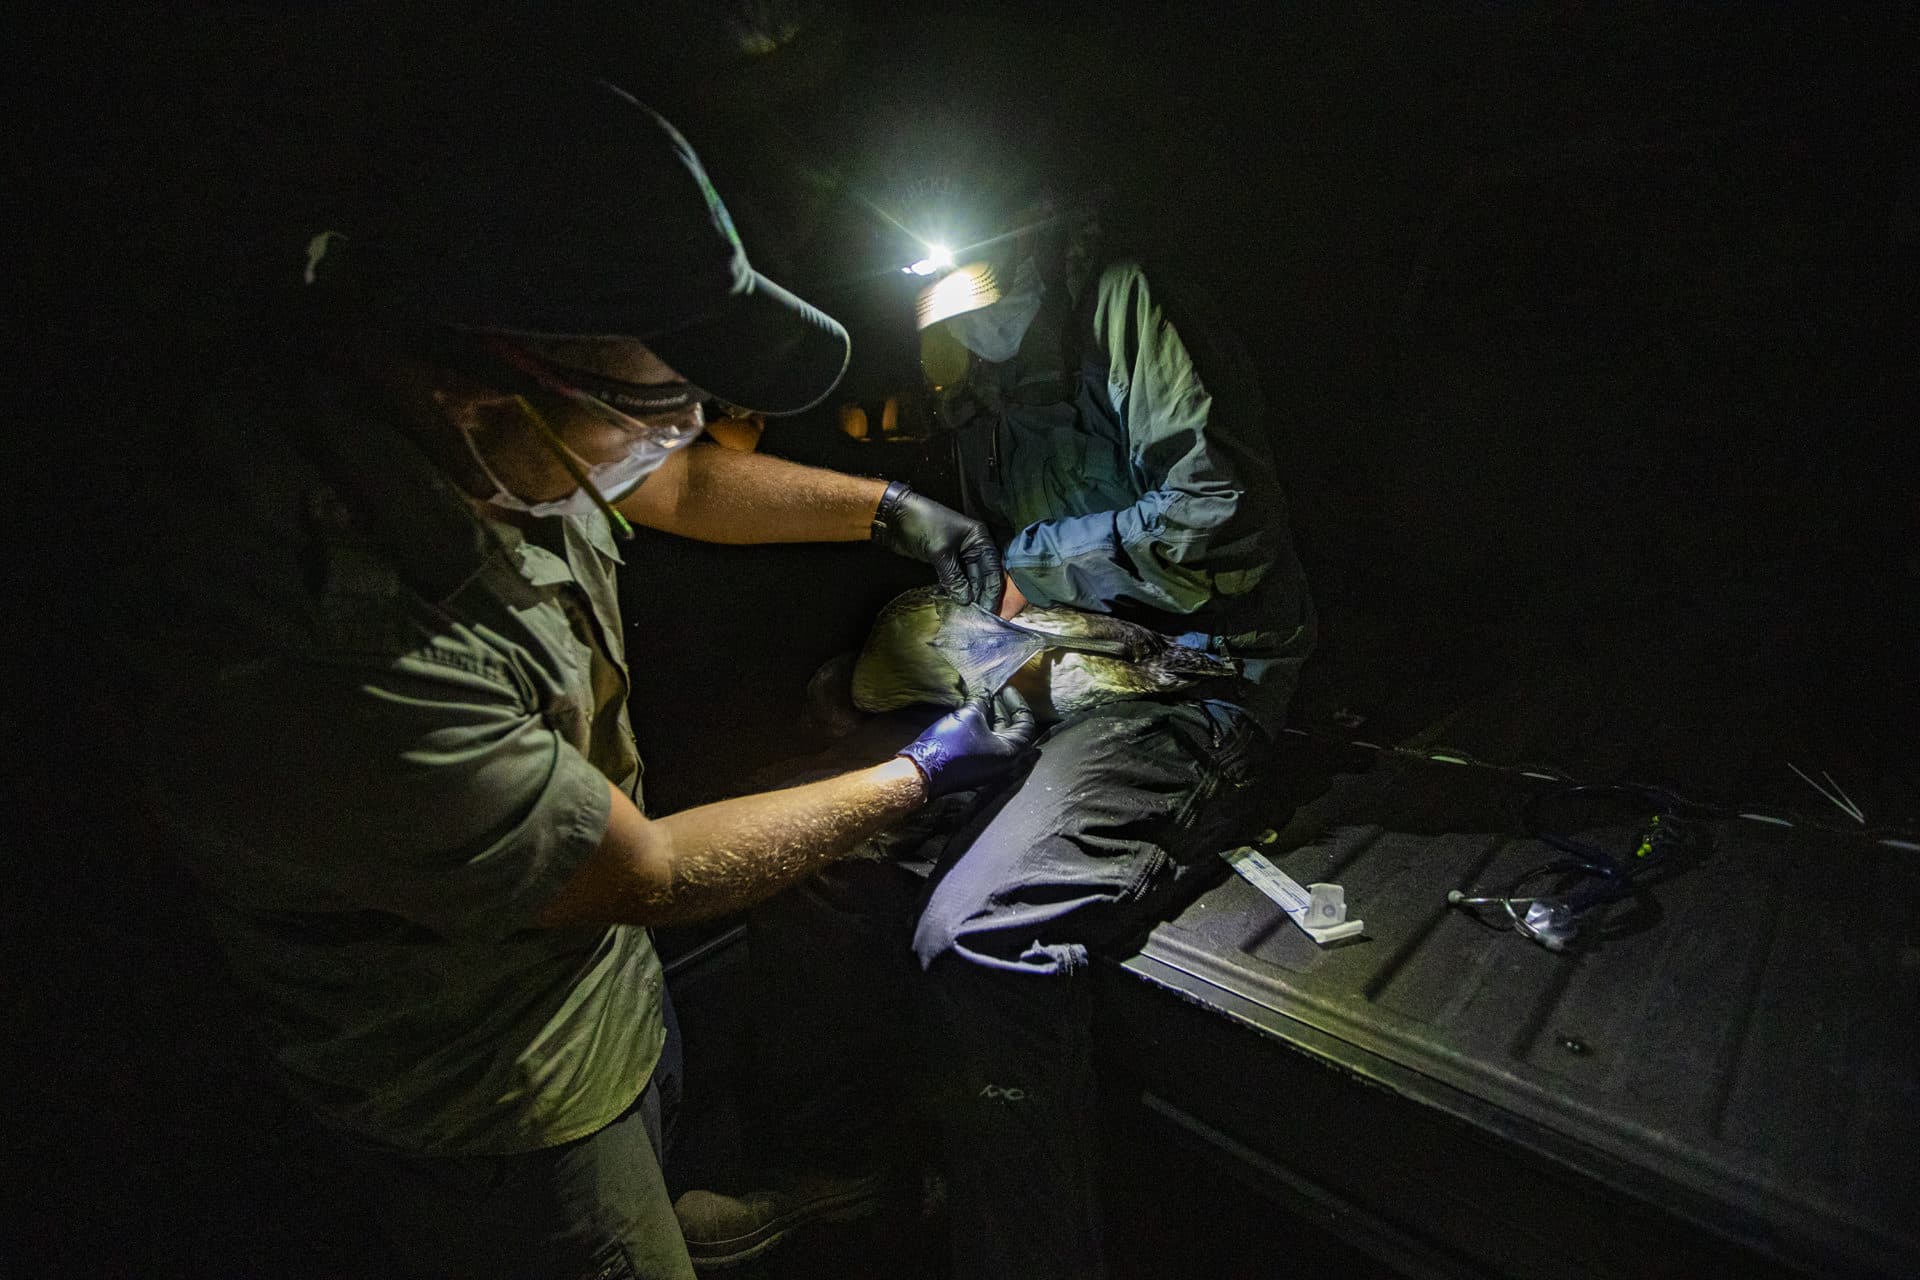 Tristan Burgess, wildlife veterinarian at Acadia Wildlife Services, examines the webbing of the loon chick’s feet while Mark Burton secures it on his lap during an examination at the Sebego Lake Station Landing in Standish. (Jesse Costa/WBUR)